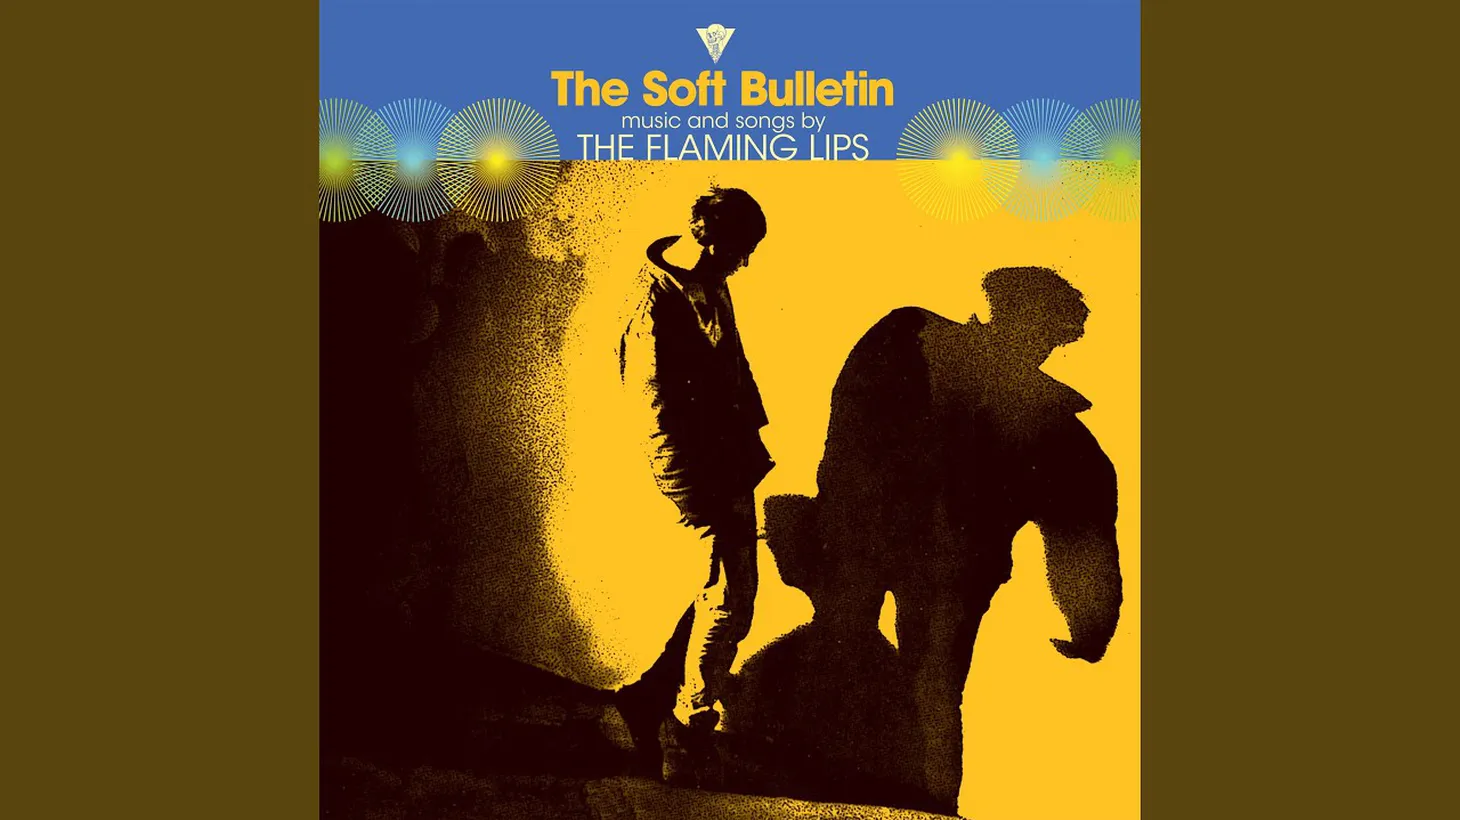 The Flaming Lips’ “The Soft Bulletin” deals with love, faith, grief, death, and addiction.